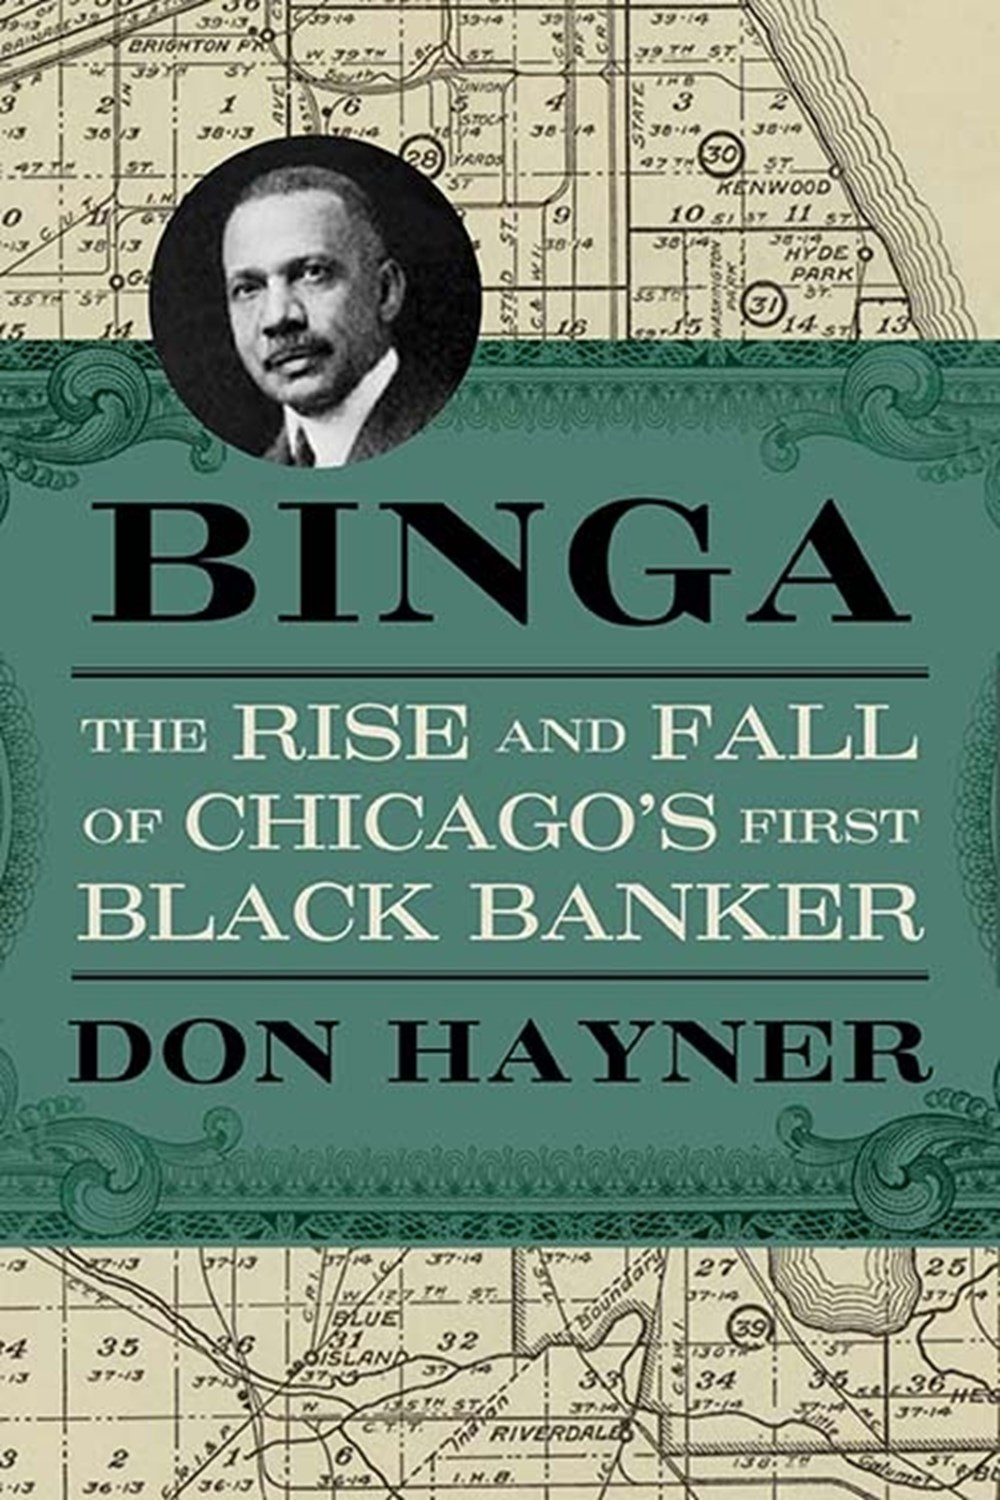 Binga: The Rise and Fall of Chicago's First Black Banker